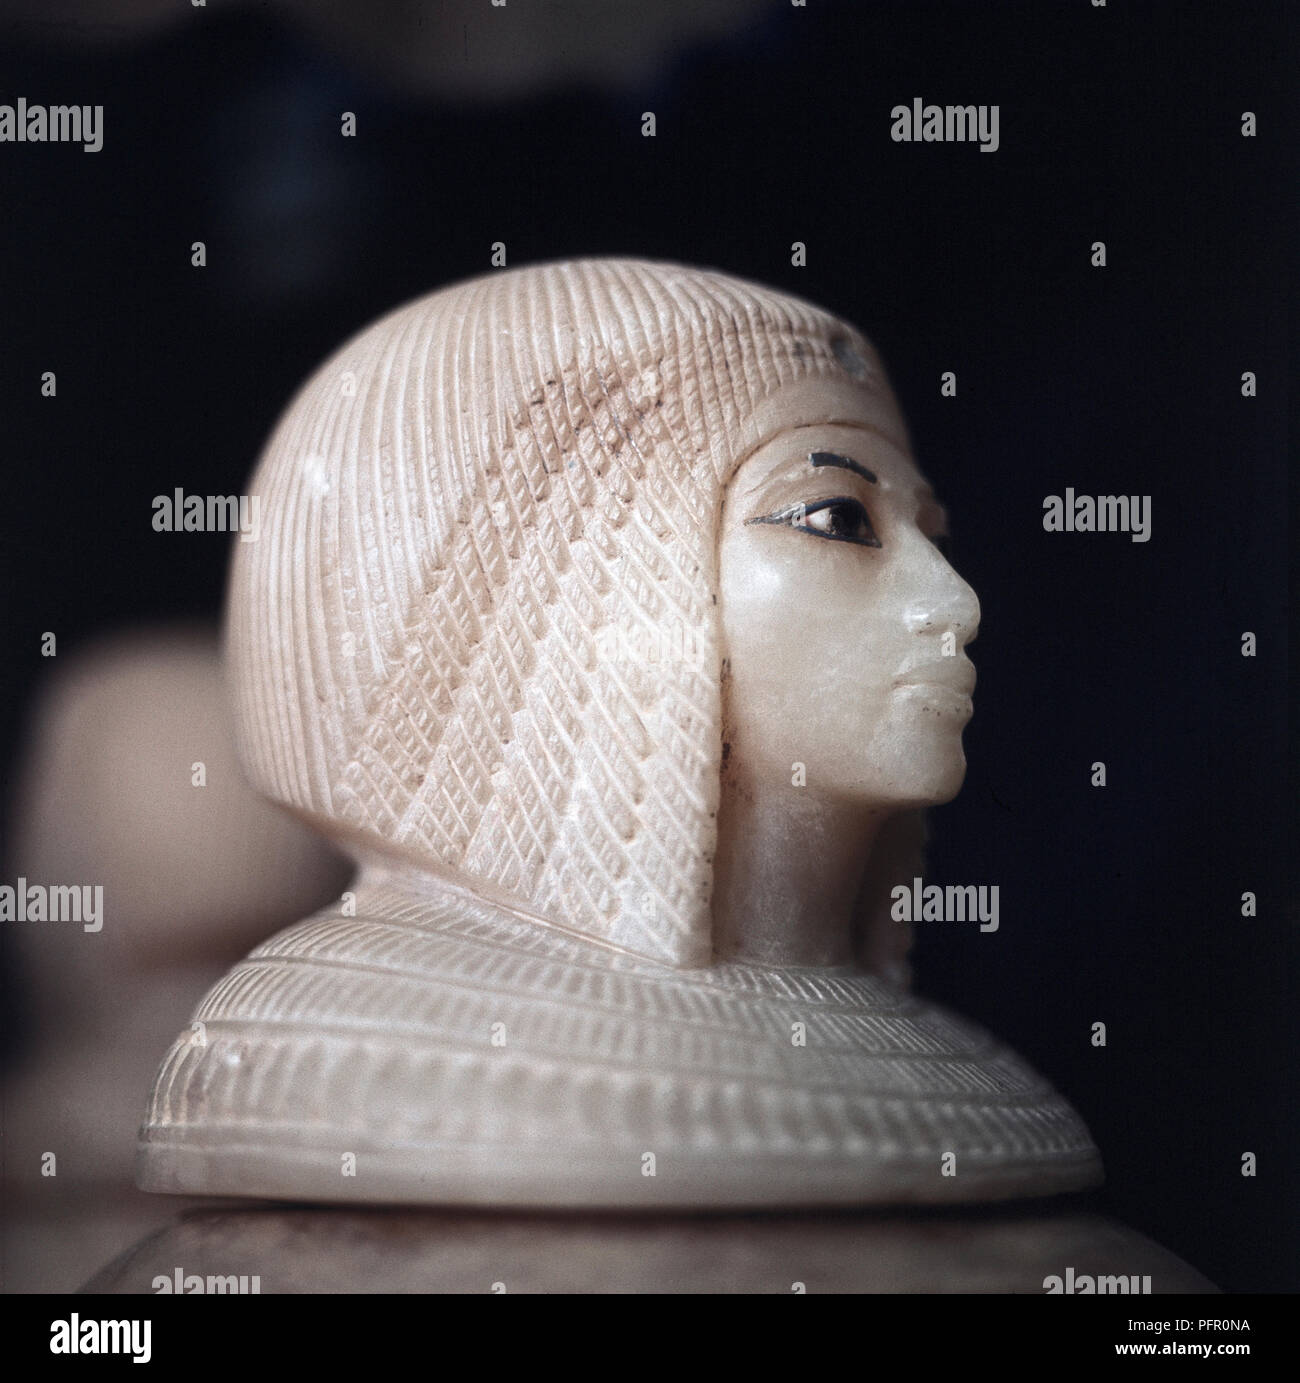 hi-res photography egyptian - and stock Alamy images queen Ancient